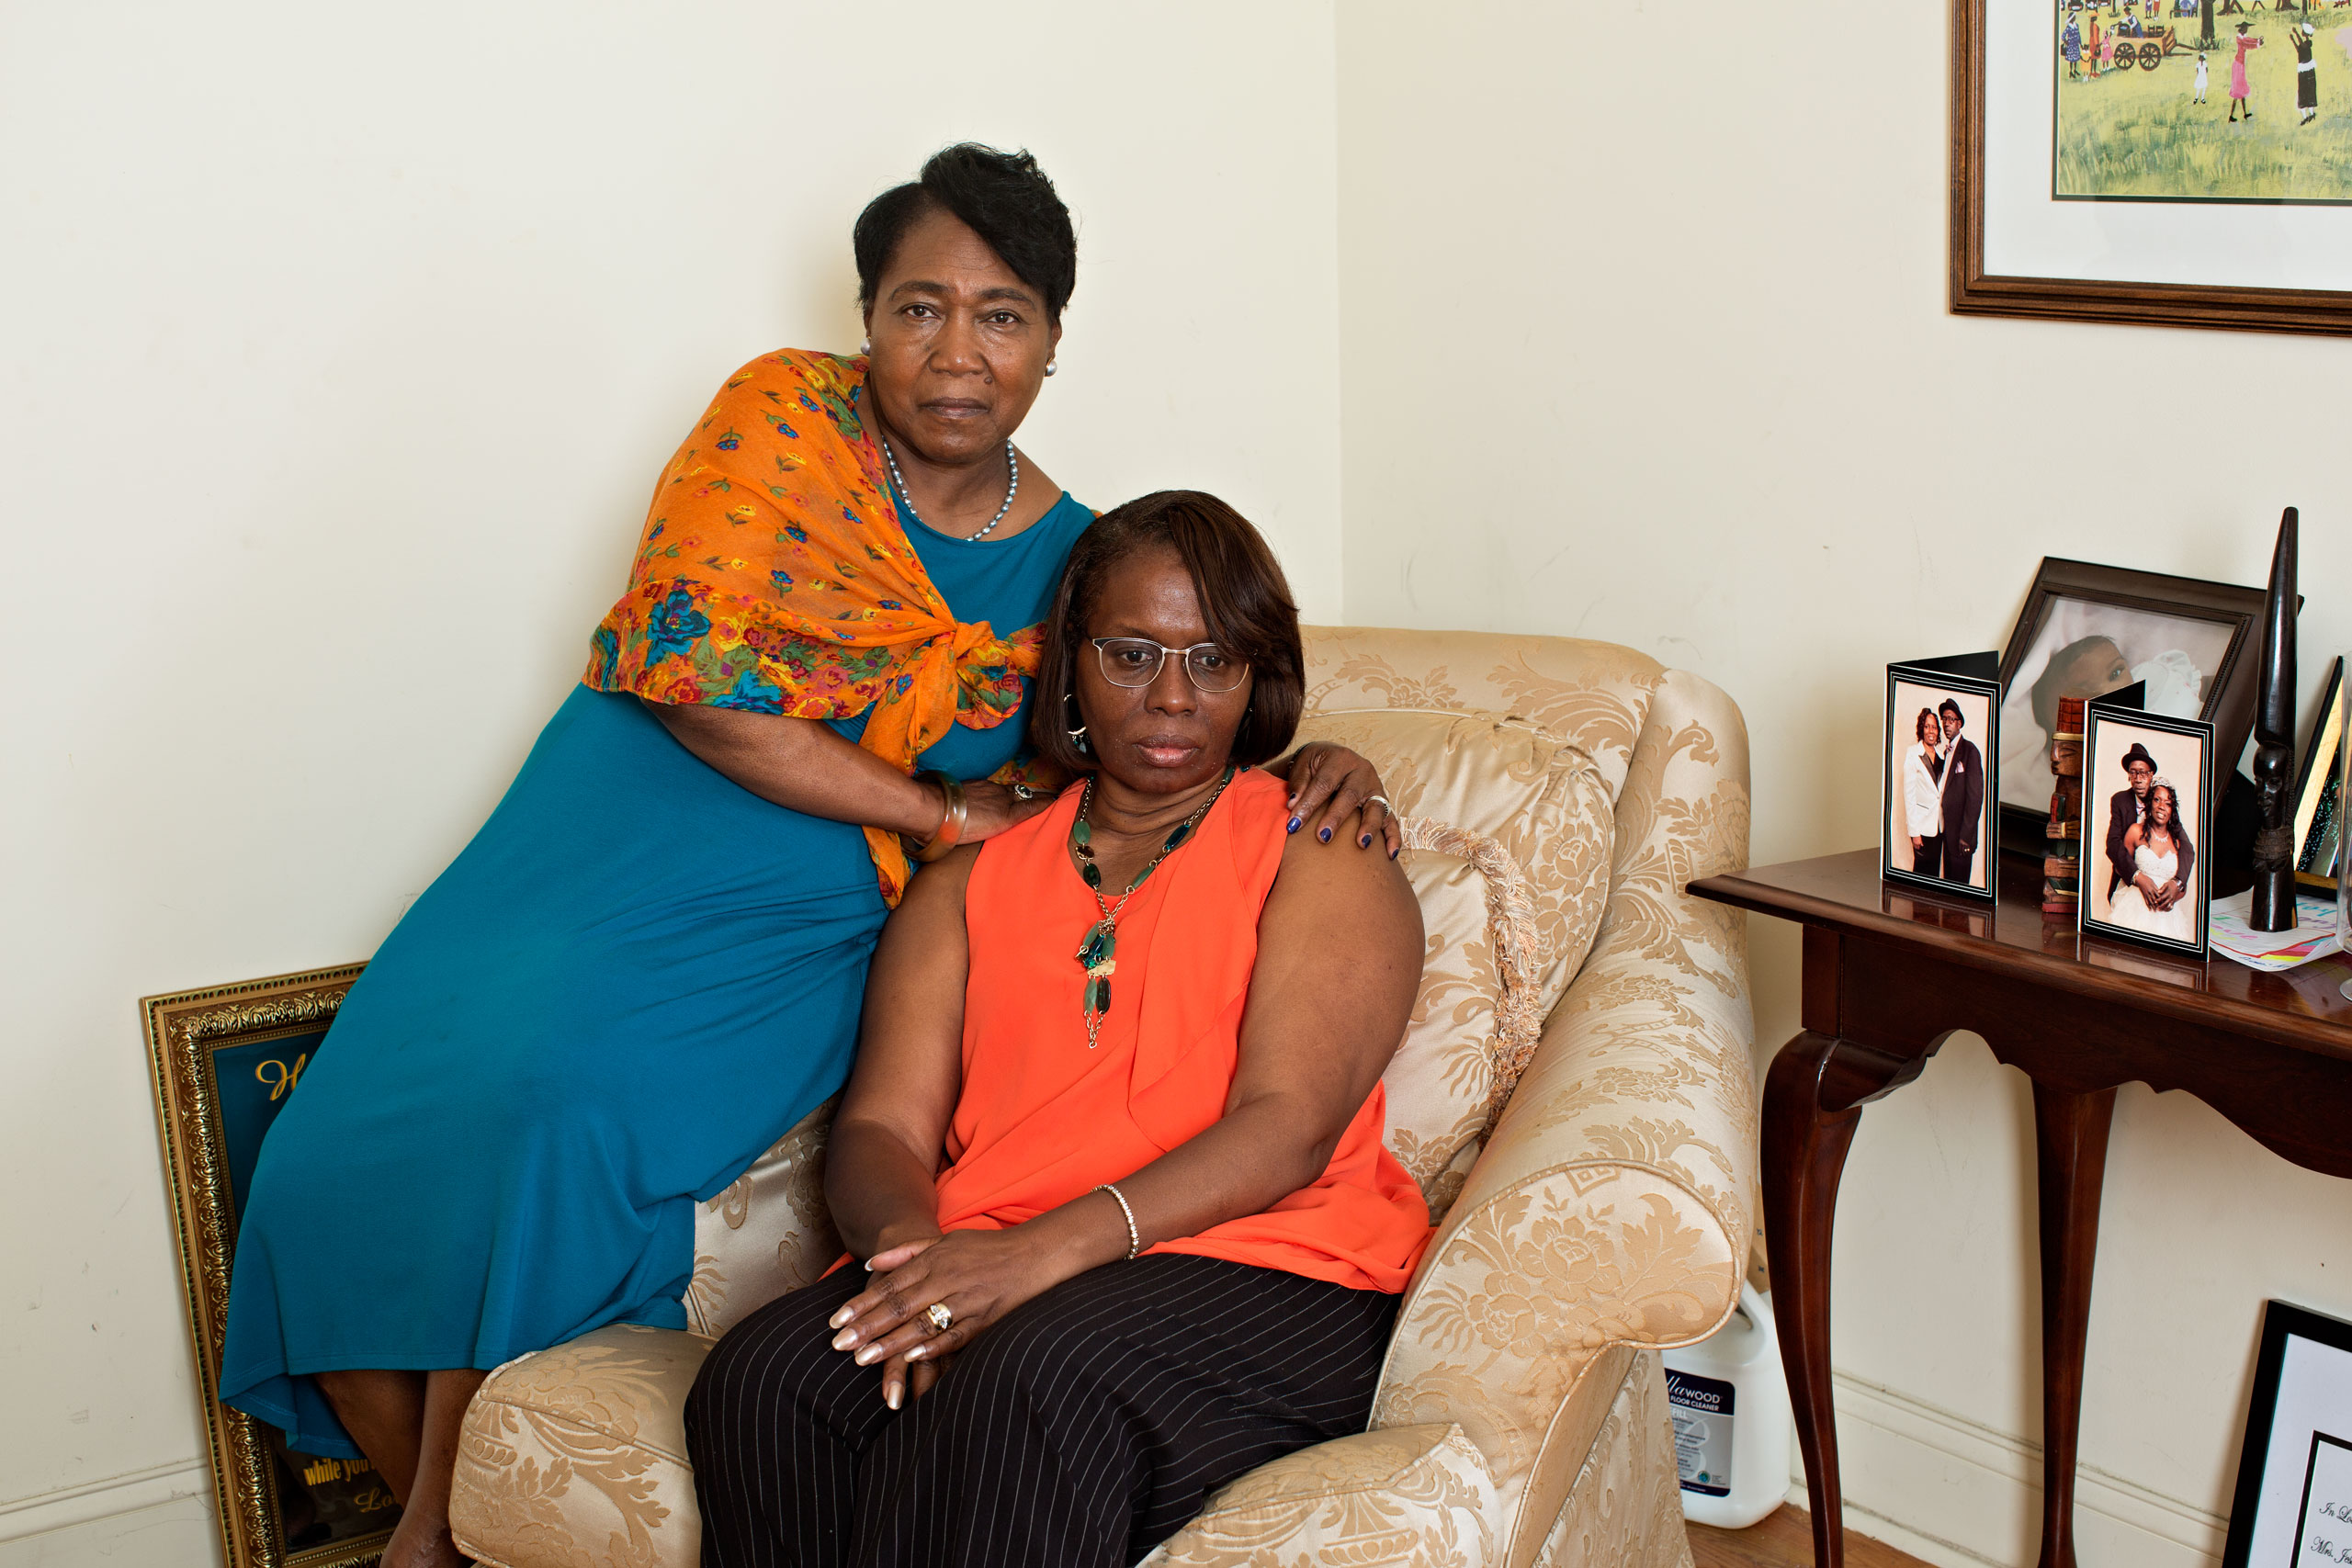 Polly Sheppard, left, and Felicia Sanders. The longtime friends, seen at Sanders’ Charleston home, both survived the massacre. The killer spared Sheppard at gunpoint so she would tell what happened. (Deana Lawson for TIME)